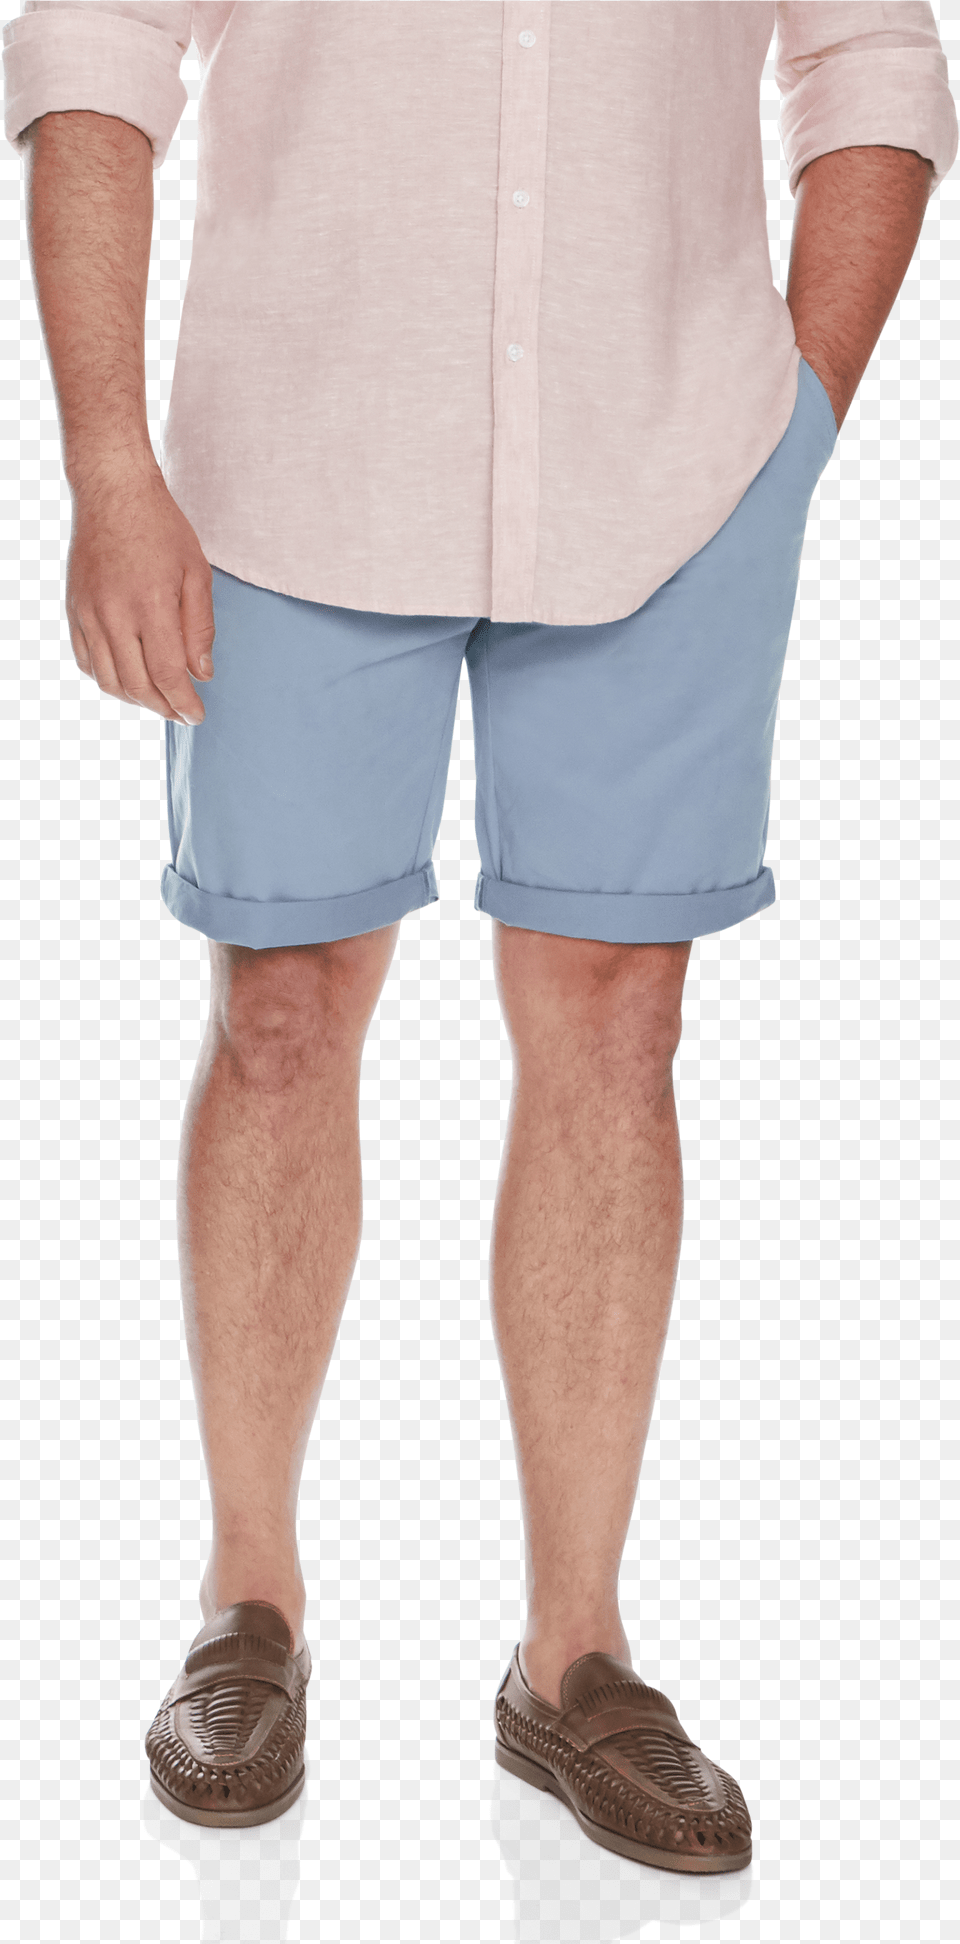 Sky Harper Stretch Short One Piece Garment, Adult, Clothing, Male, Man Png